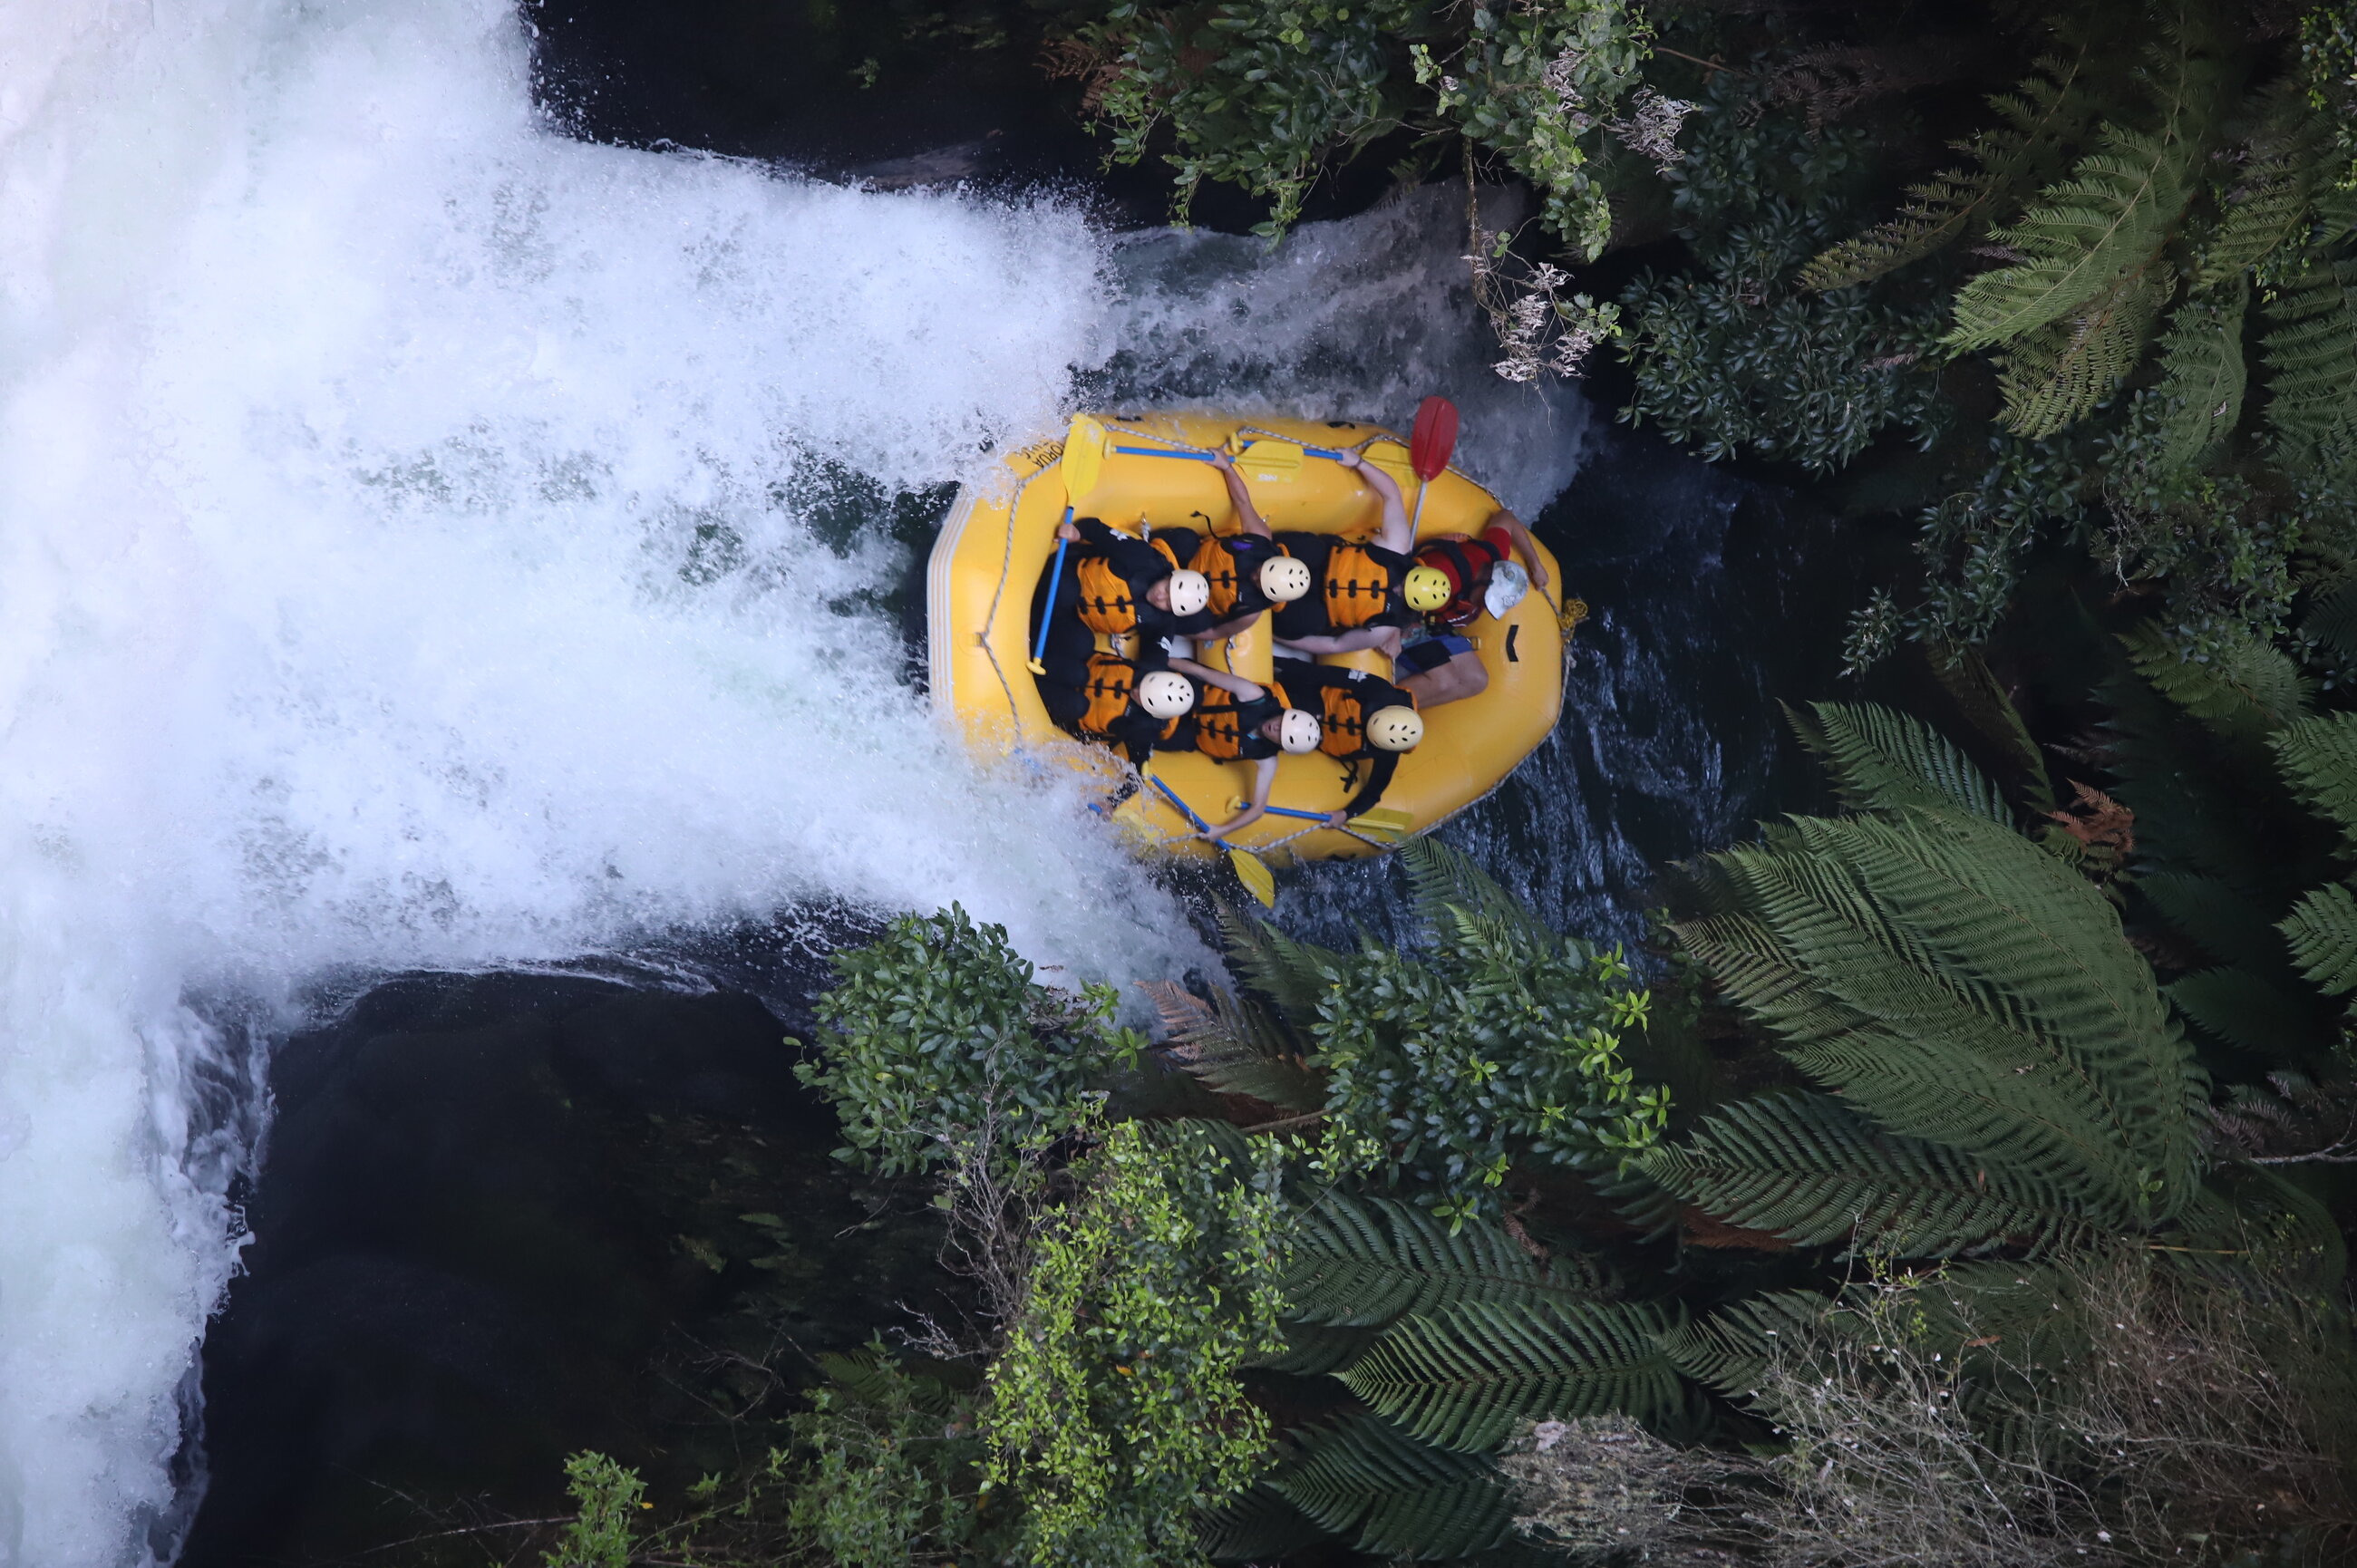 20ft waterfall rafting in New Zealand